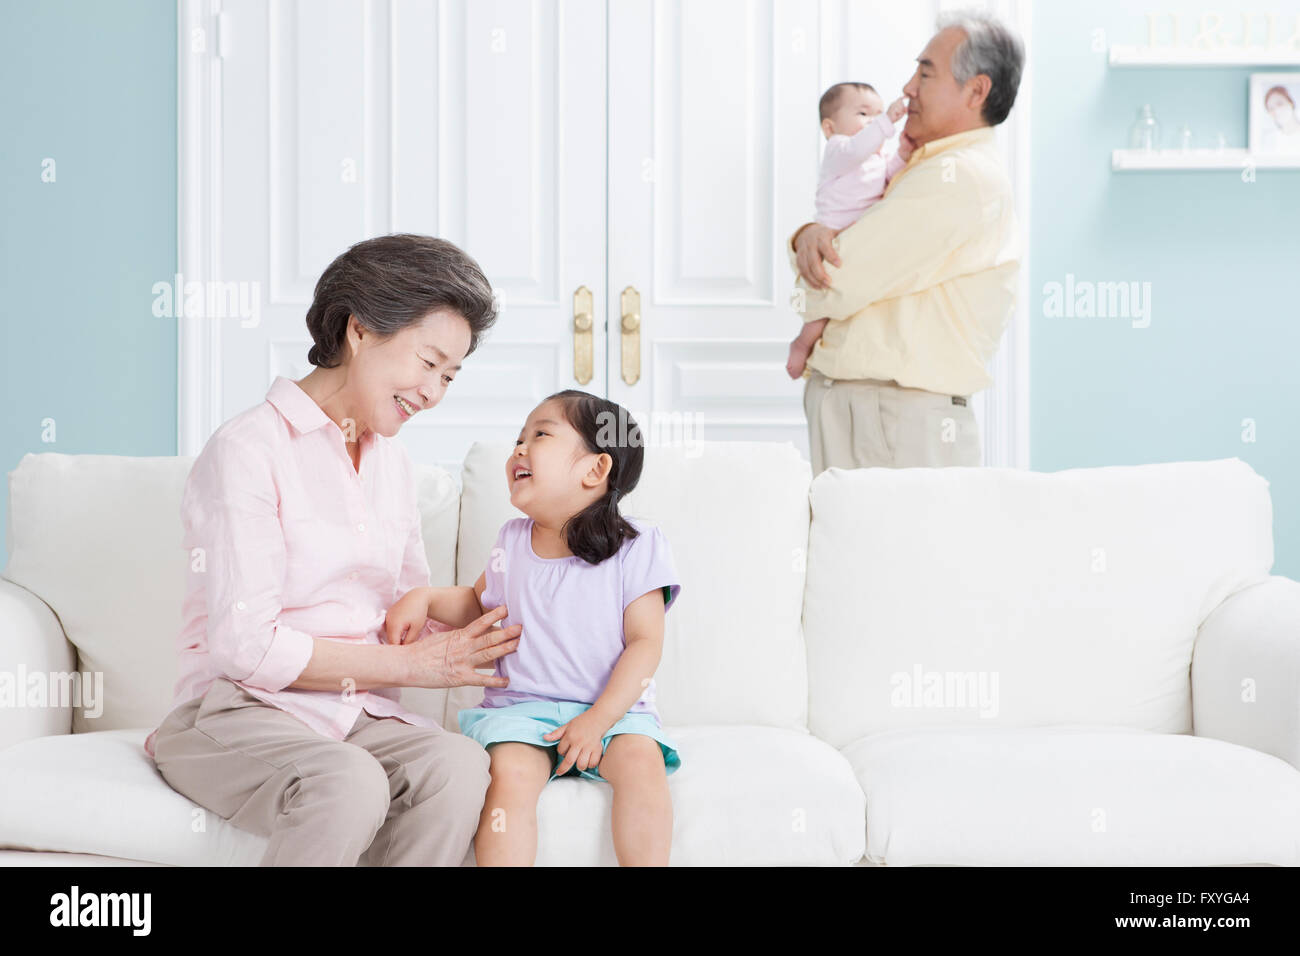 Grandmother having fun with her granddaughter and grandfather holding a baby behind them Stock Photo